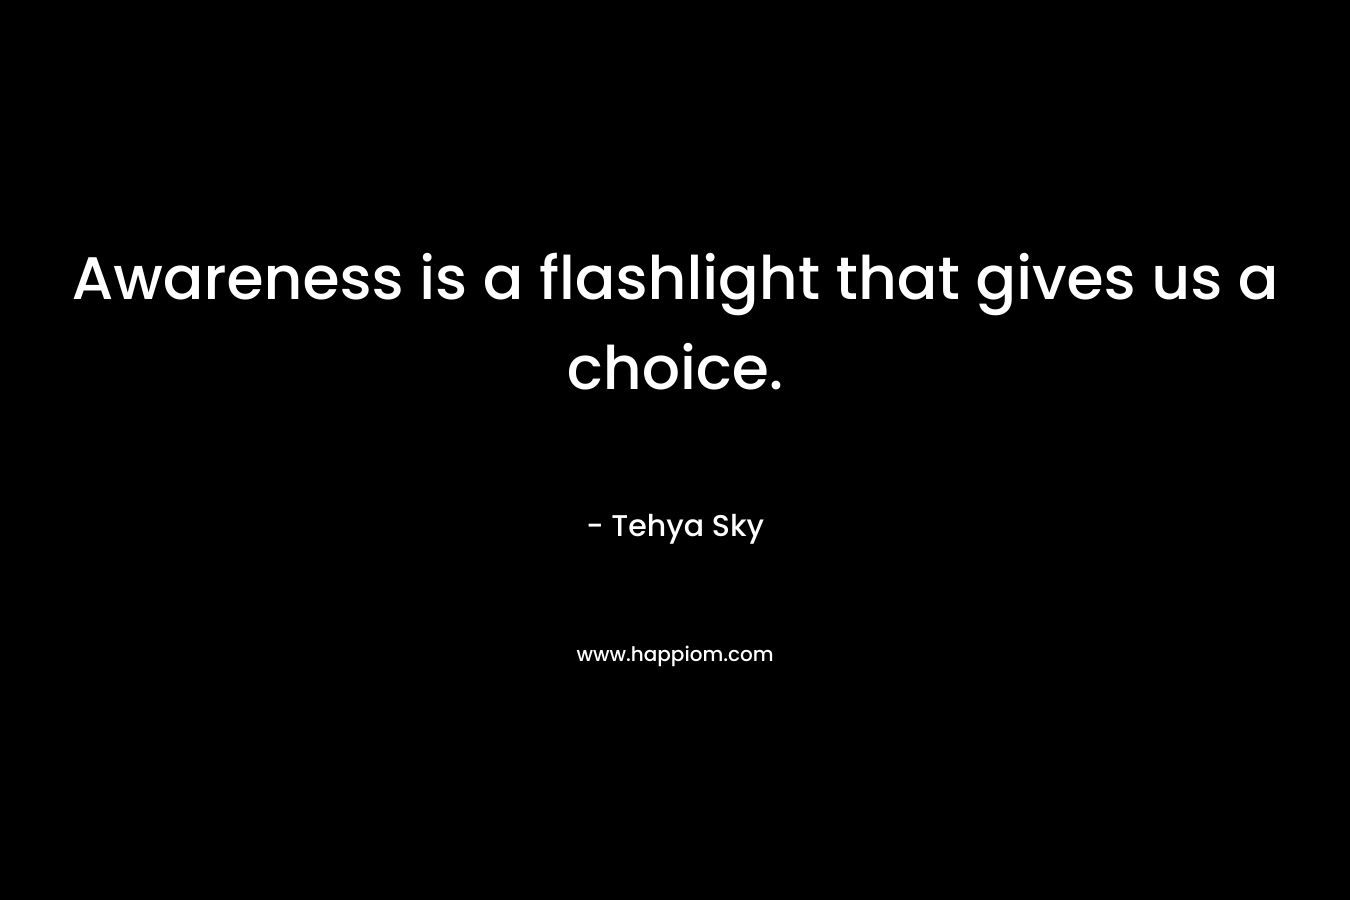 Awareness is a flashlight that gives us a choice.